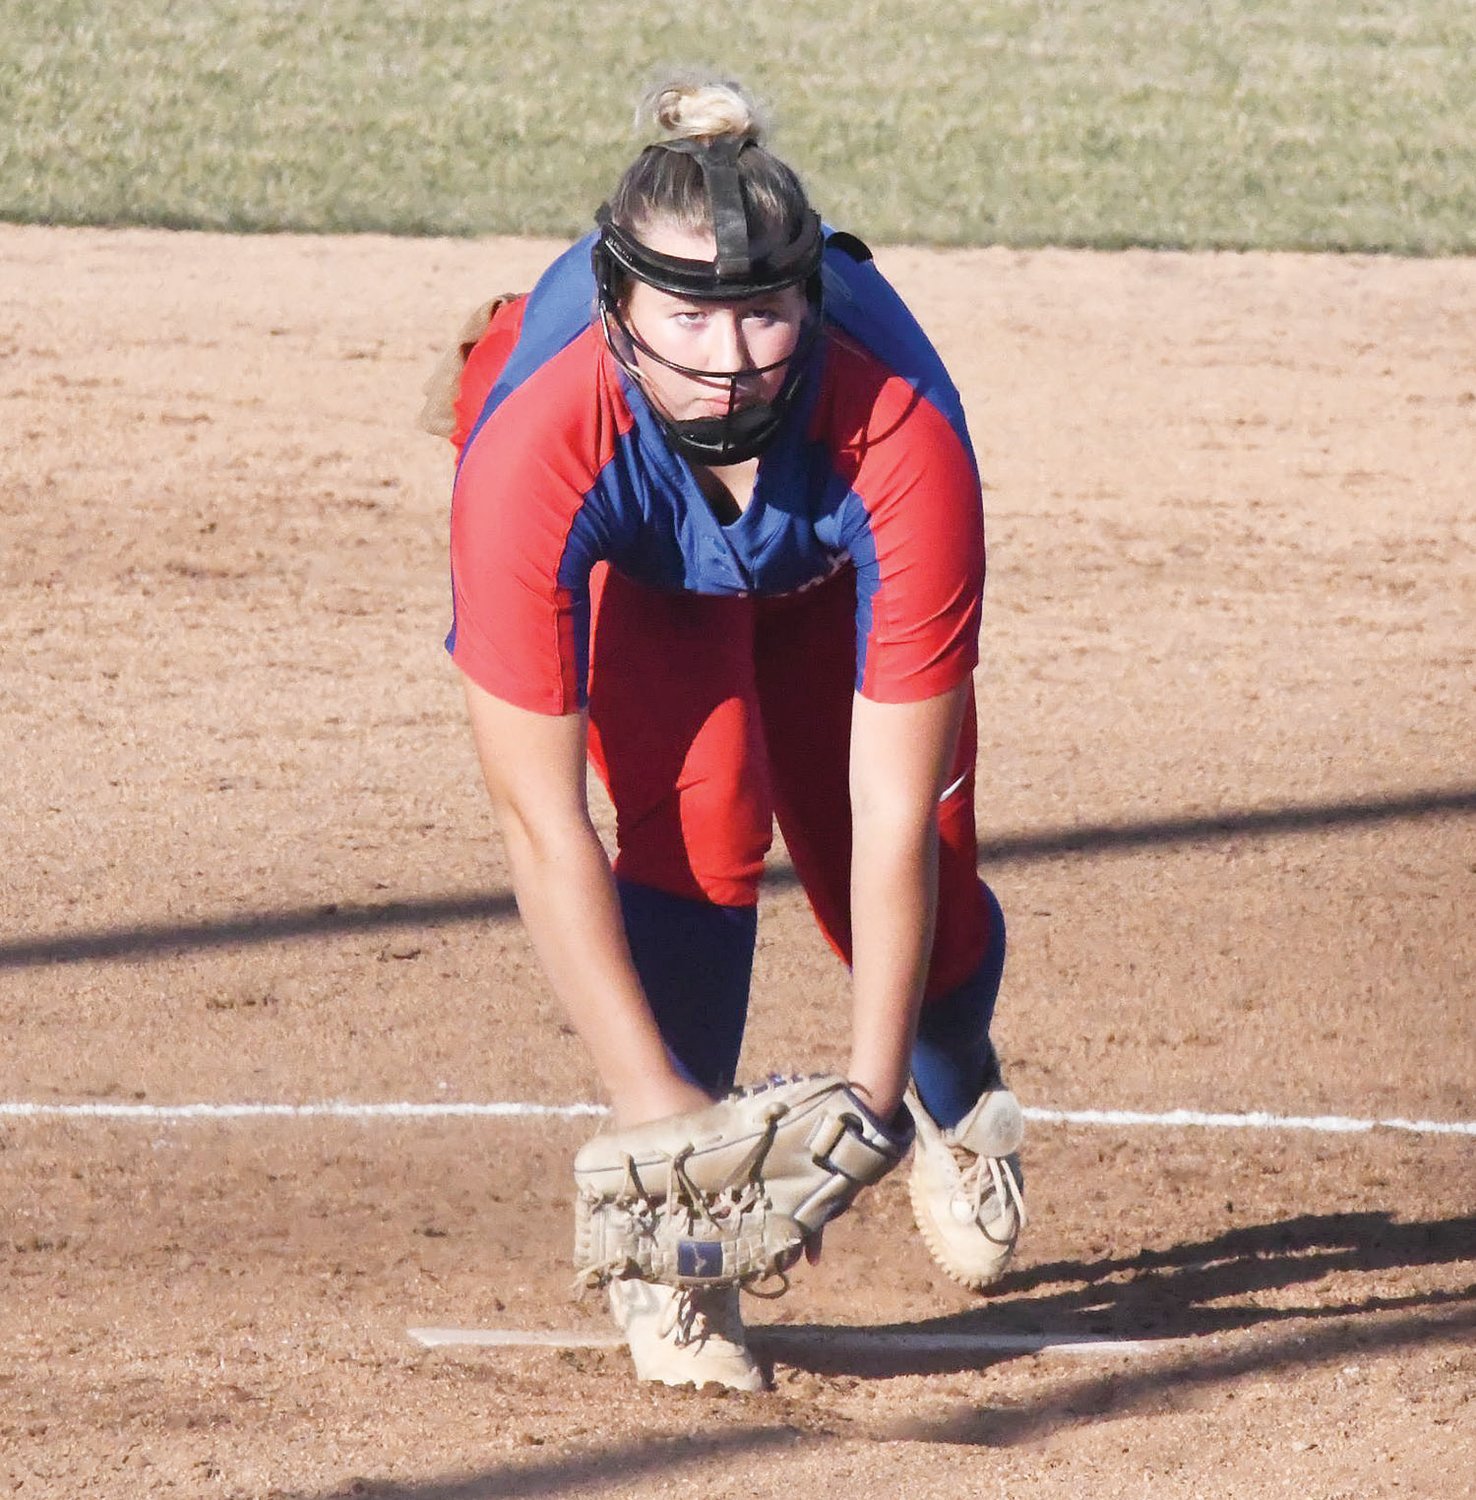 Moberly pitcher Taylor Martin stares down the sign from home plate before throwing as the Spartans played Cairo Tuesday.